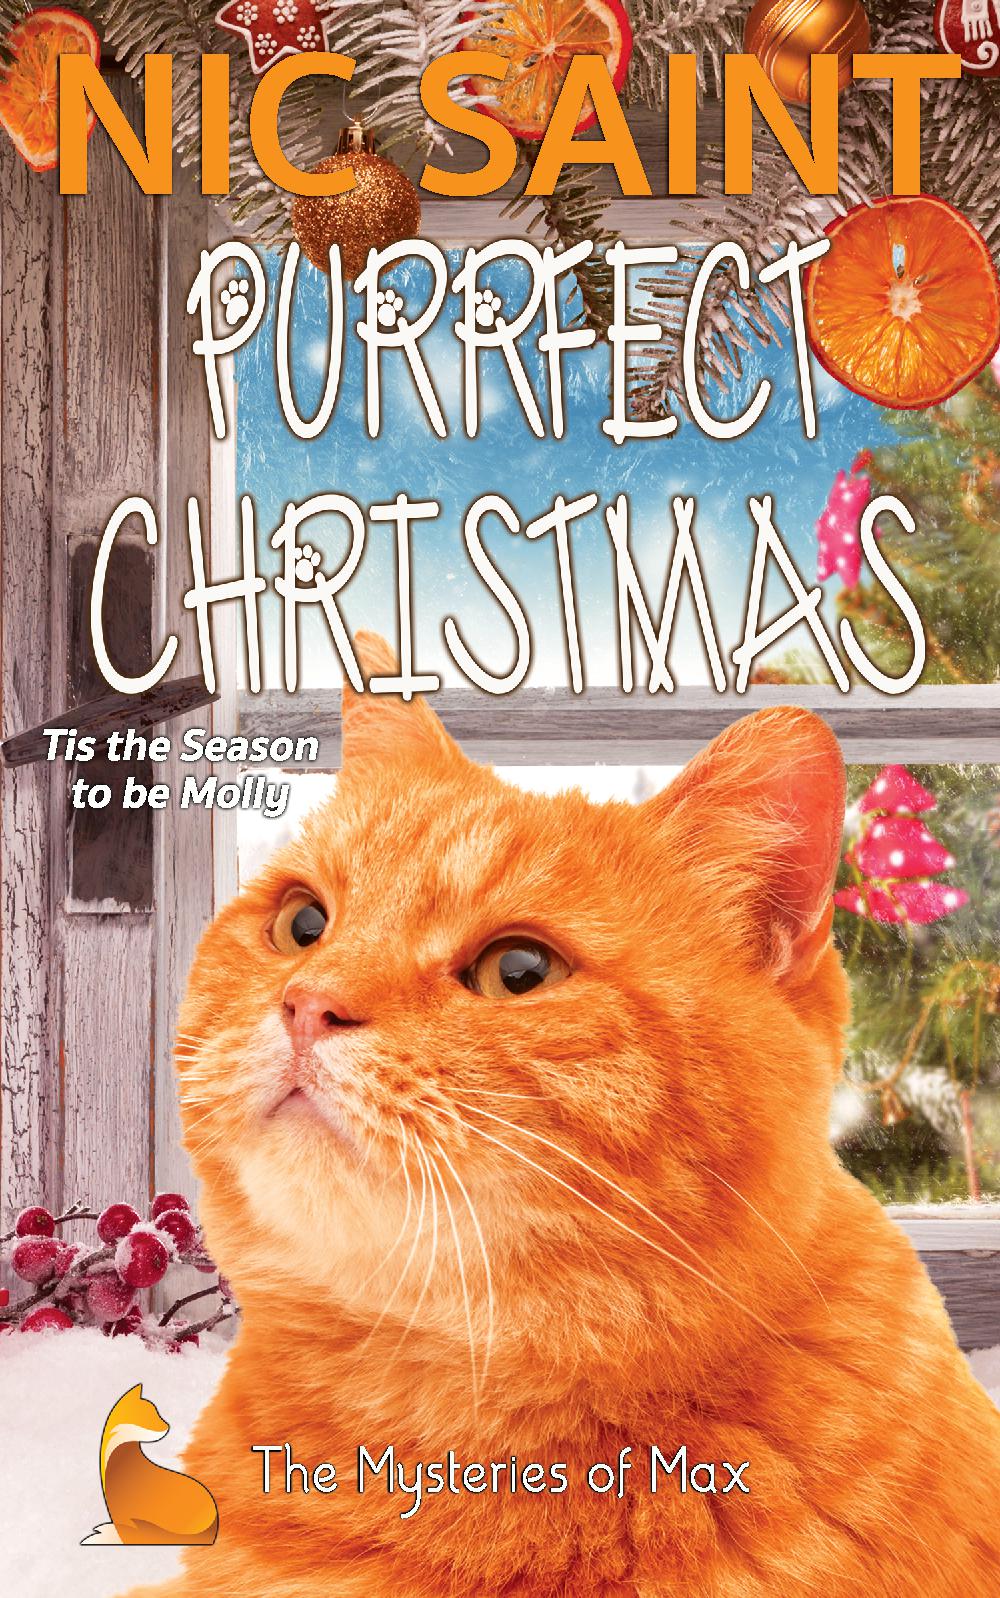 Purrfect Christmas (Paperback)